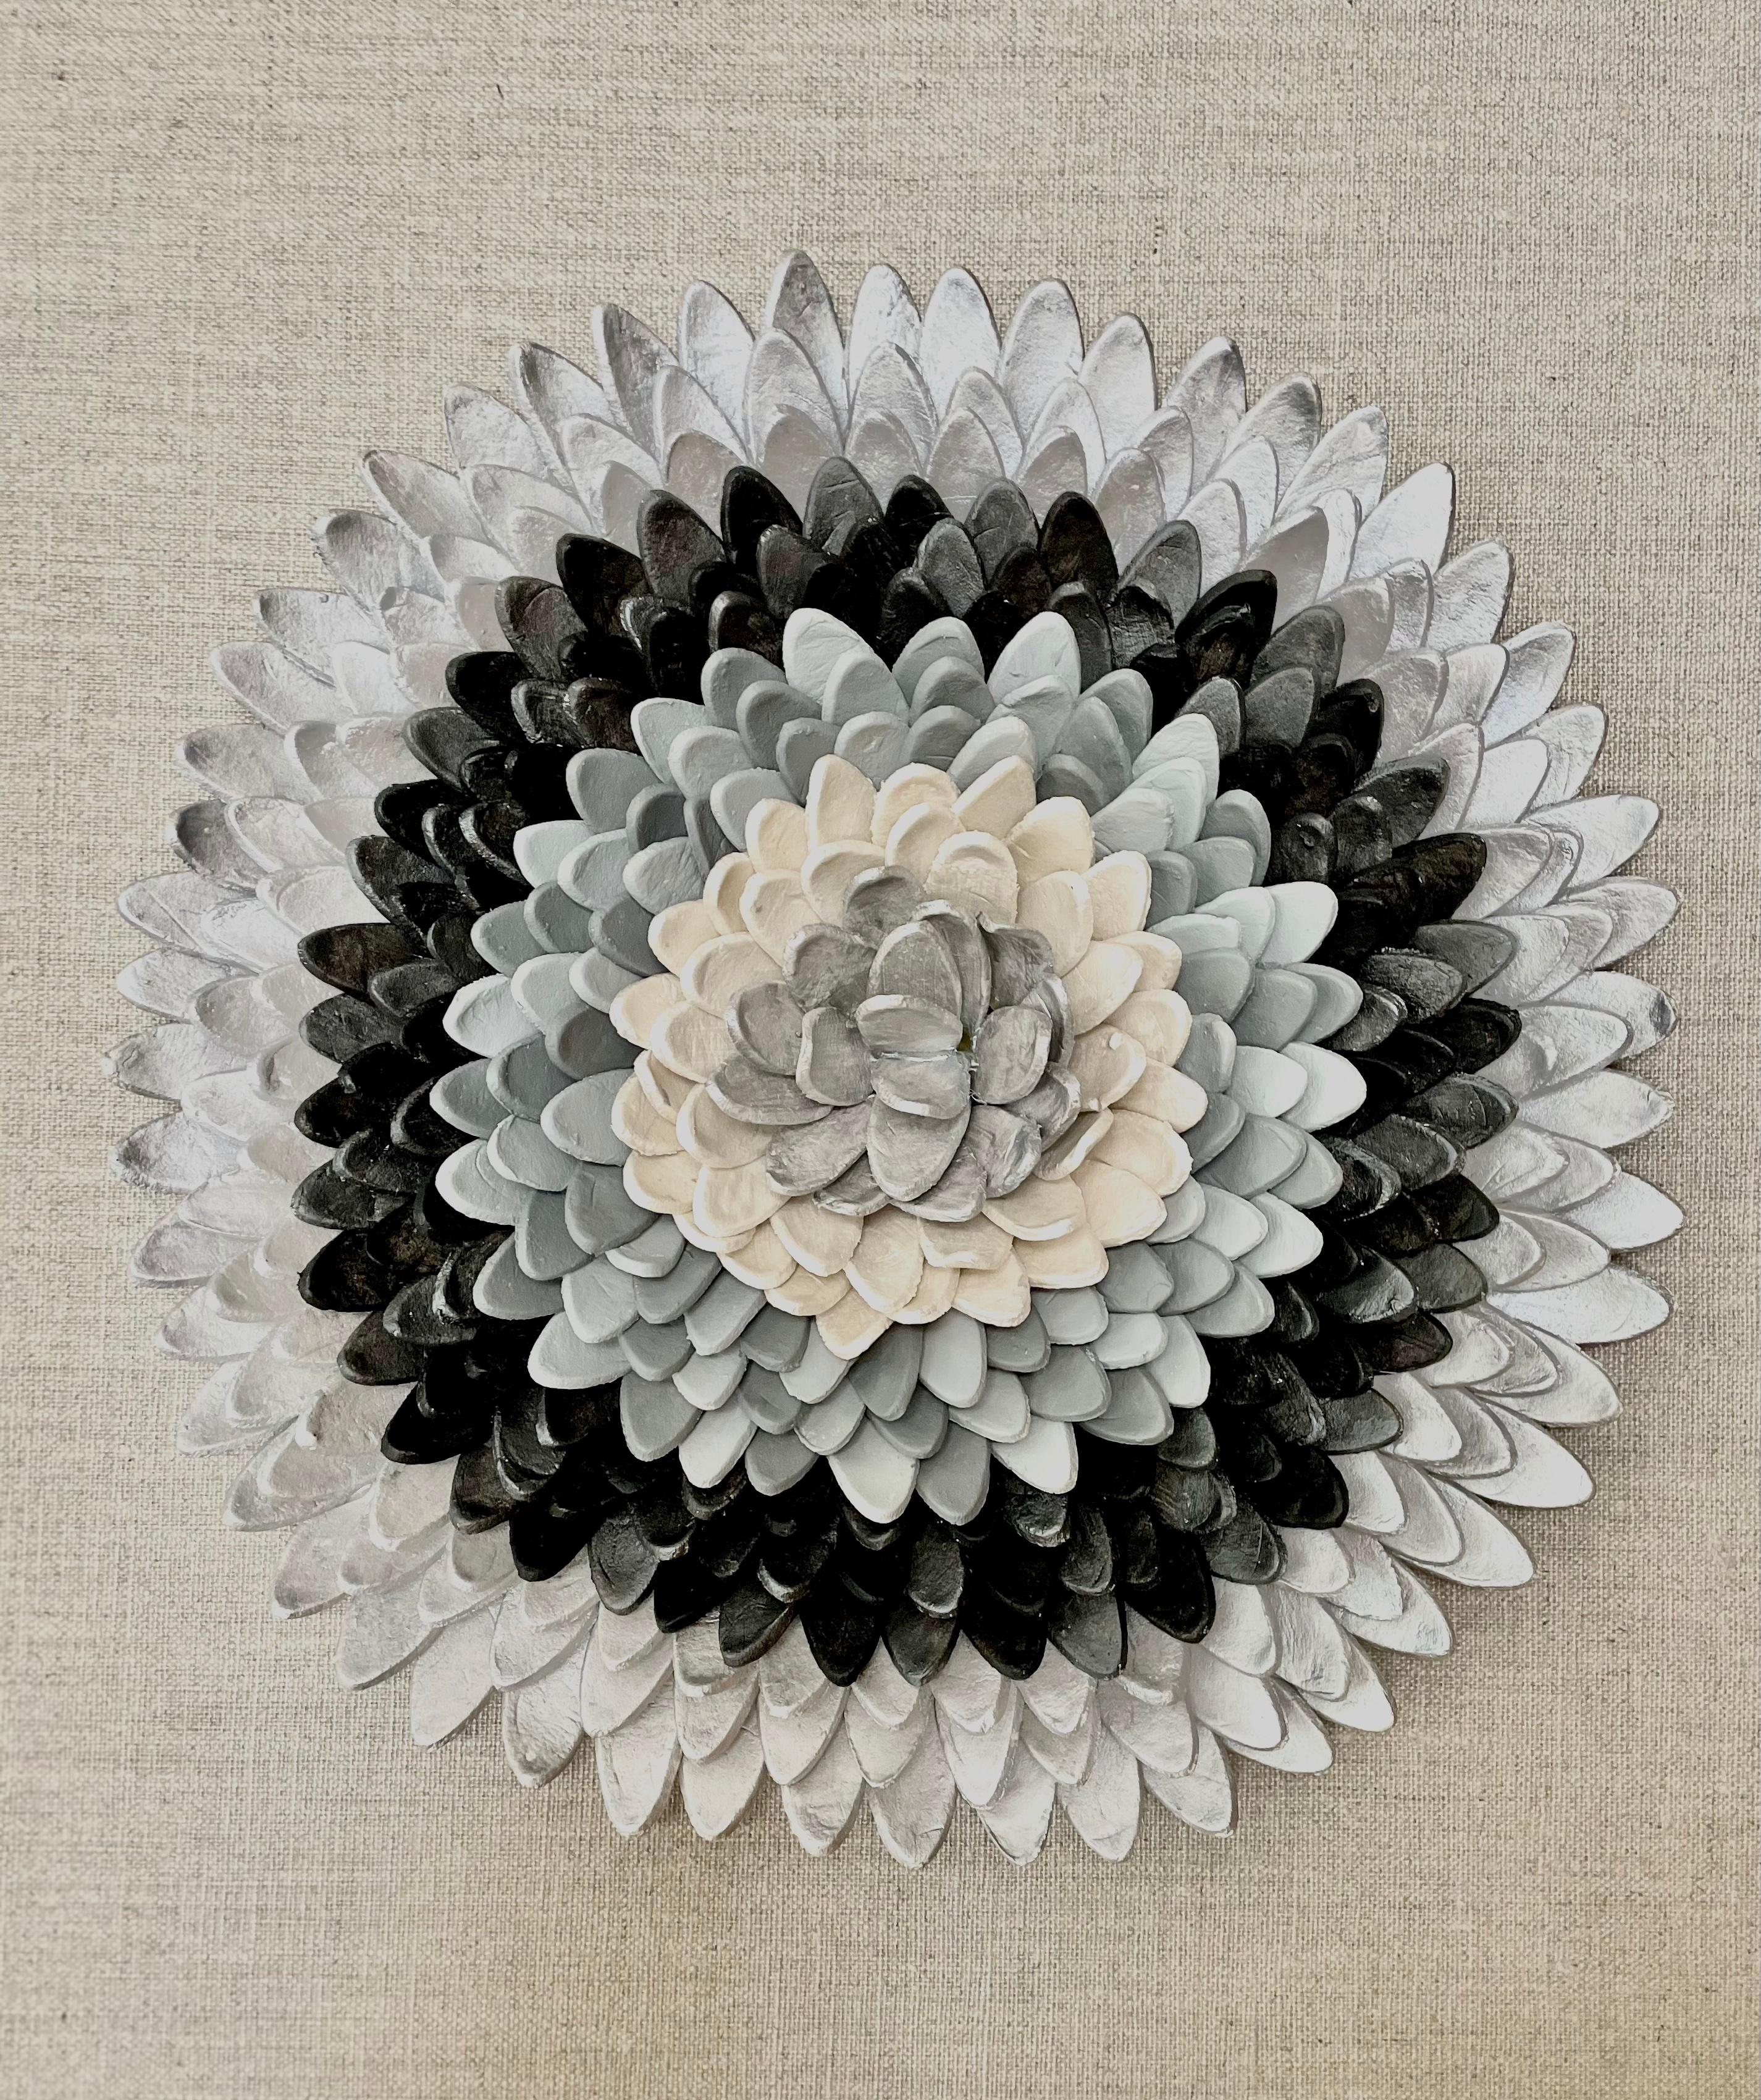 Flos 1- 3D nature inspired floral grey silver clay composition in plexiglass box - Mixed Media Art by Marie Laforey